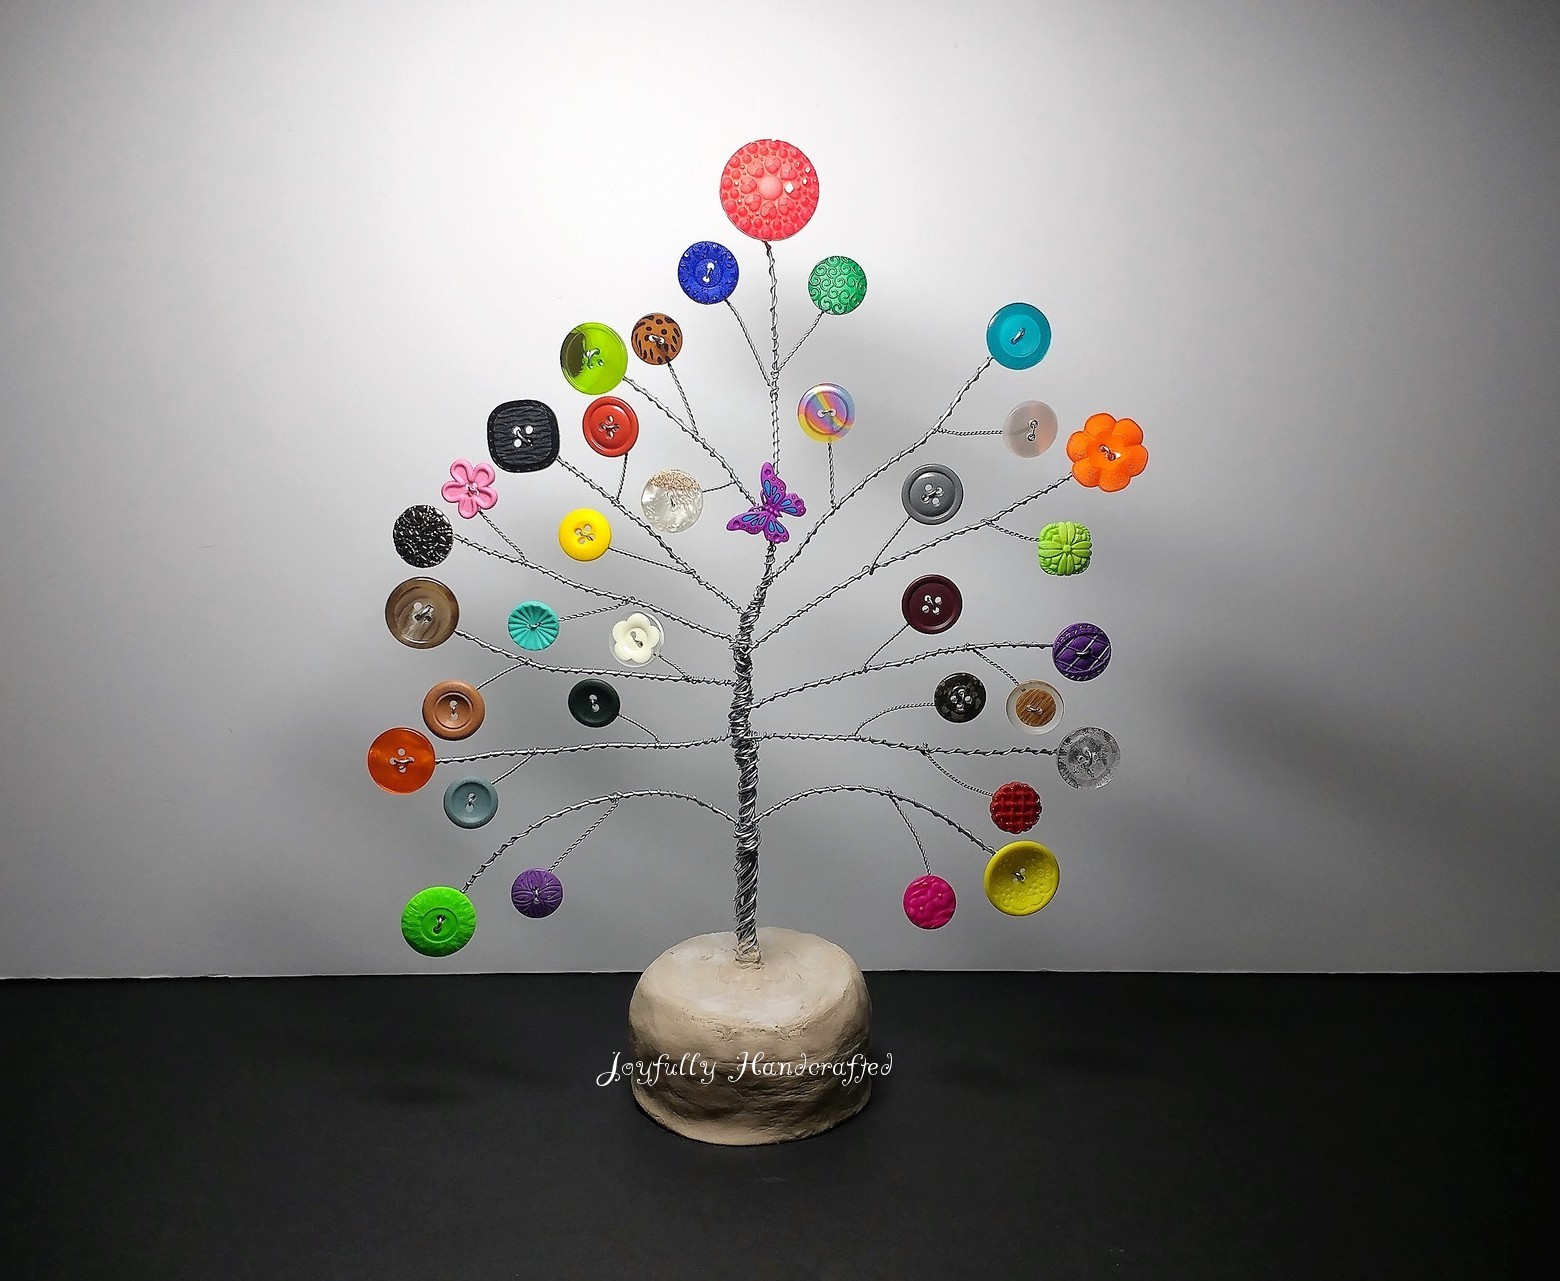 The Button Tree Project